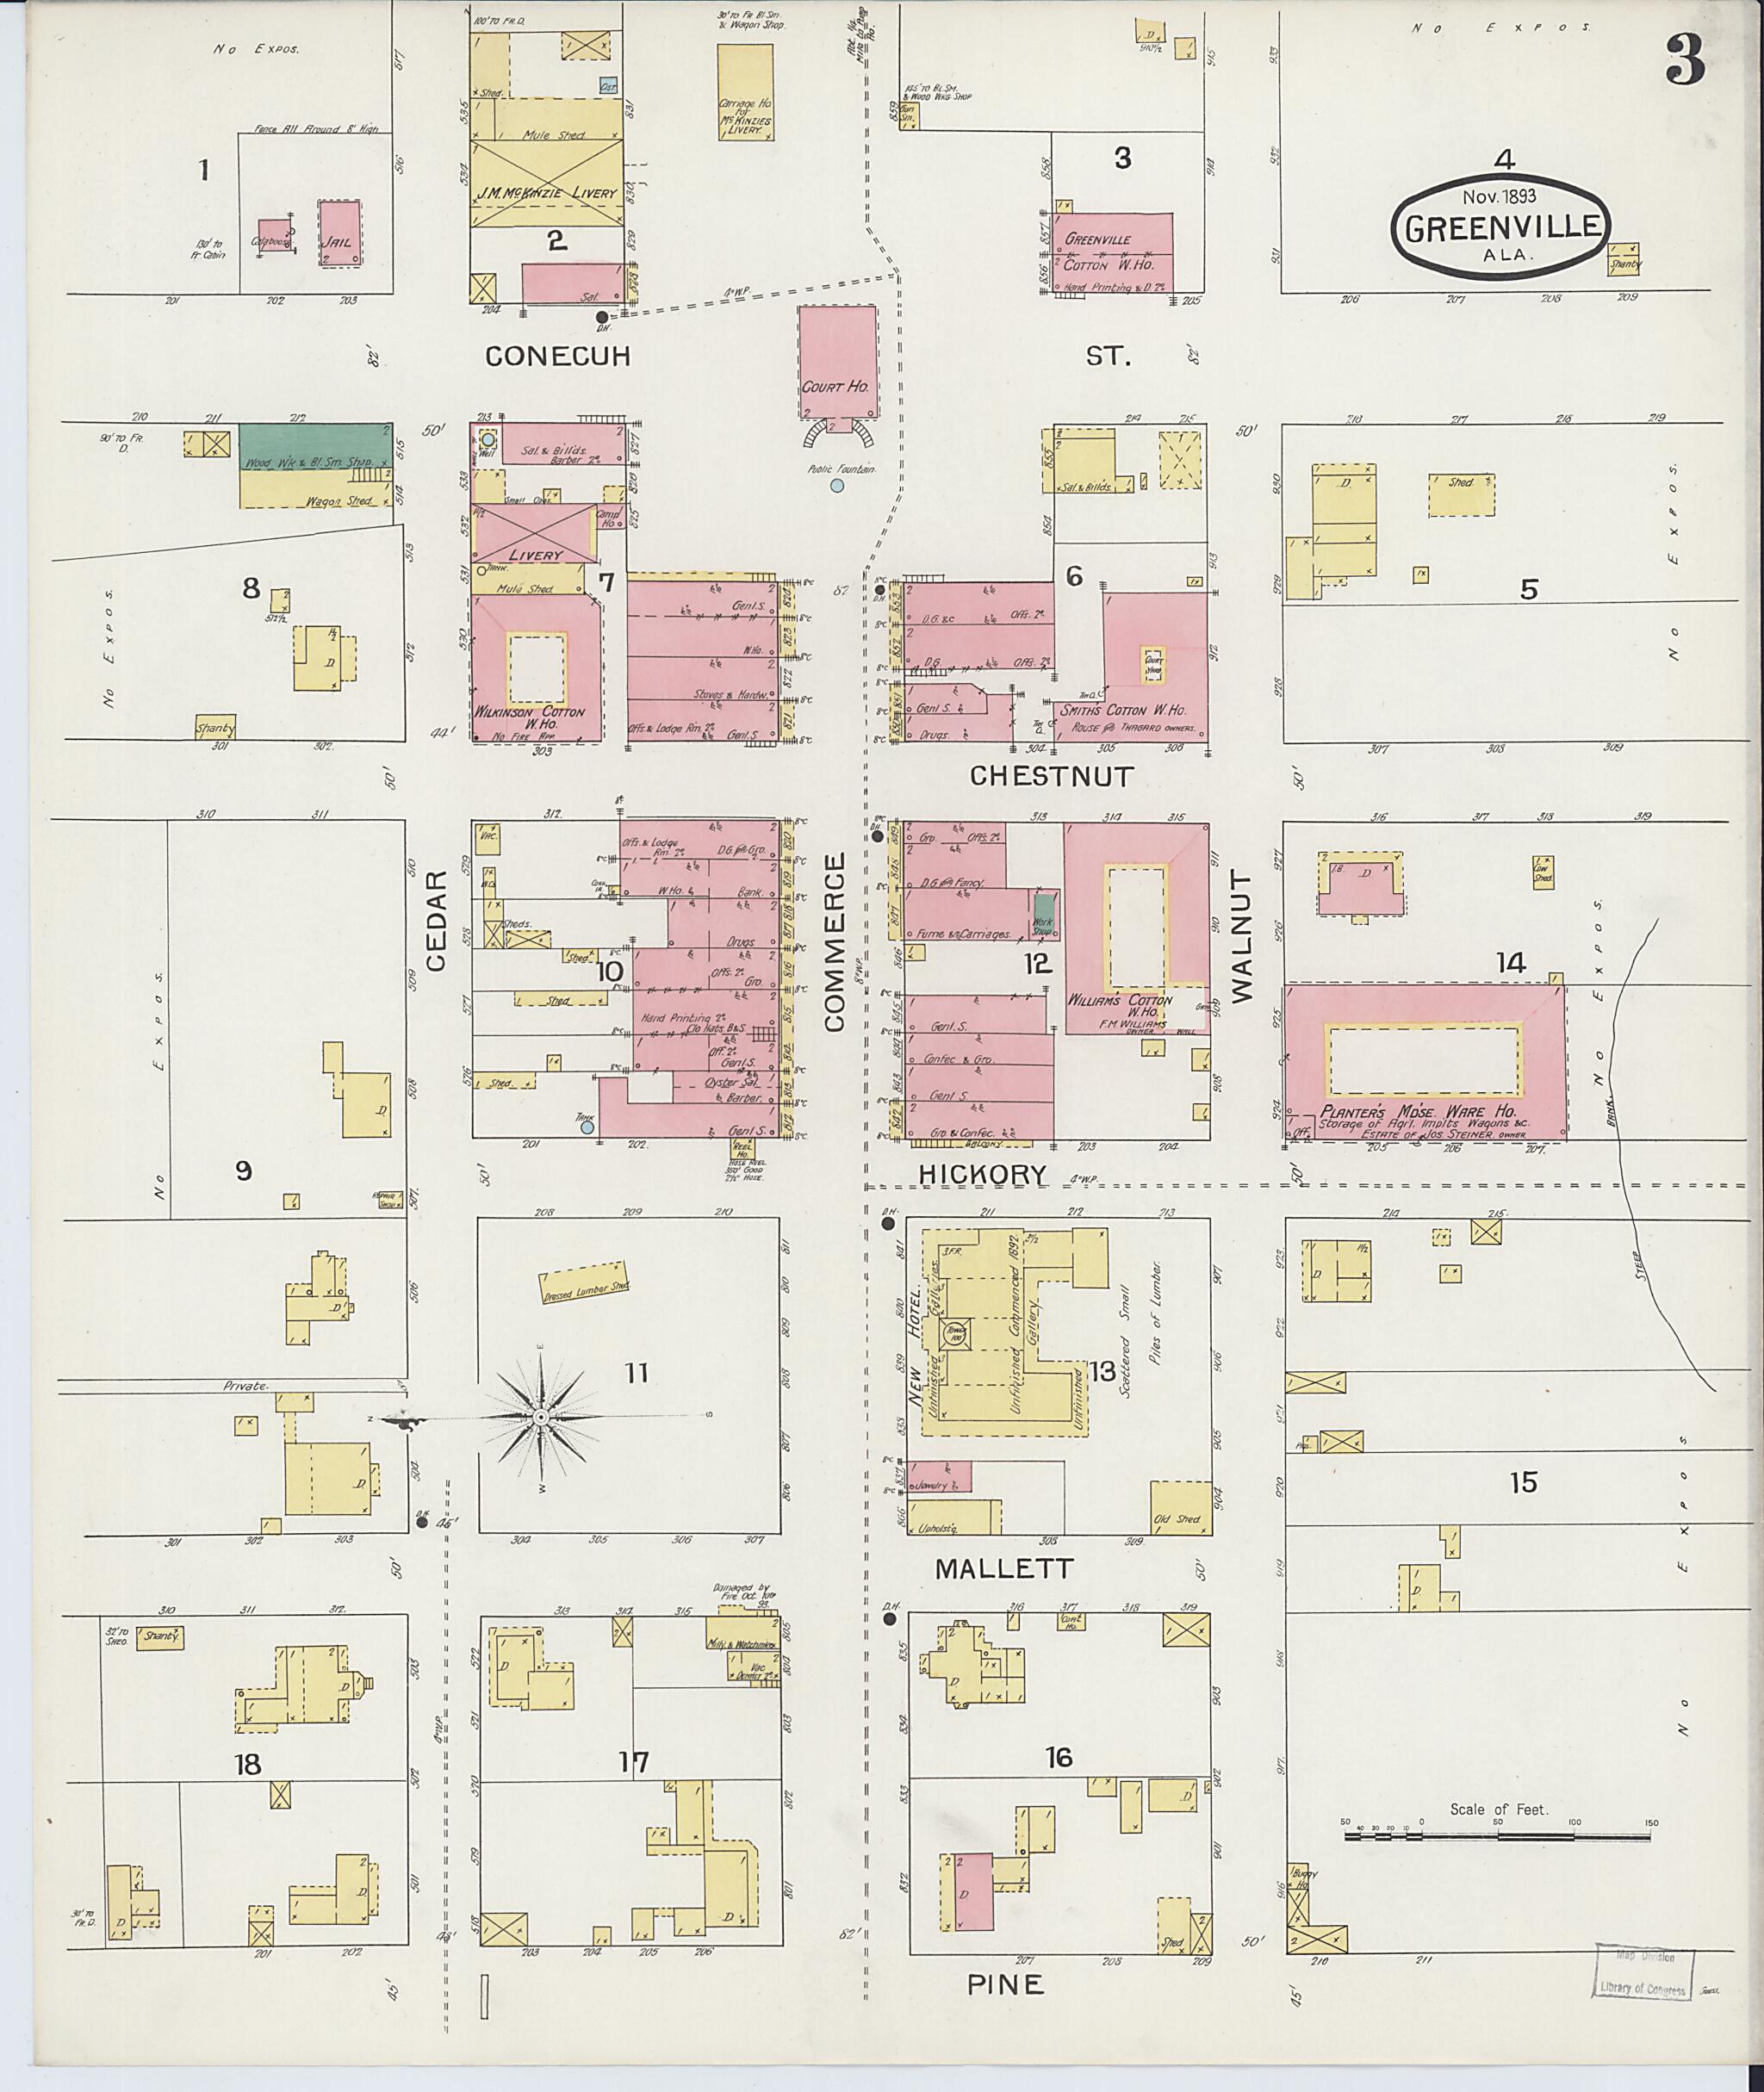 This old map of Greenville, Butler County, Alabama was created by Sanborn Map Company in 1893